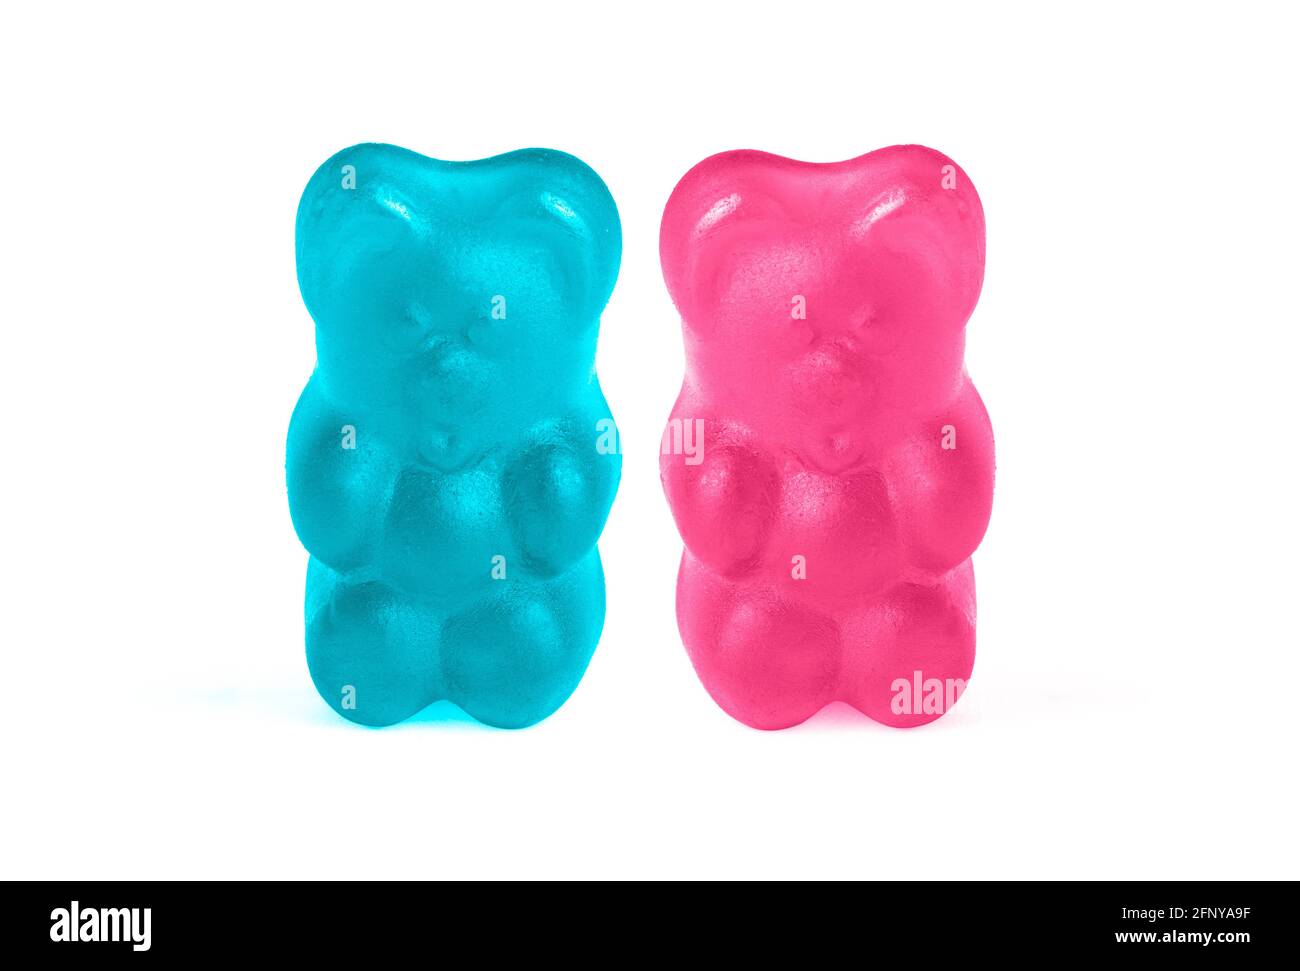 Gummy Bear Images Images – Browse 3,846 Stock Photos, Vectors, and